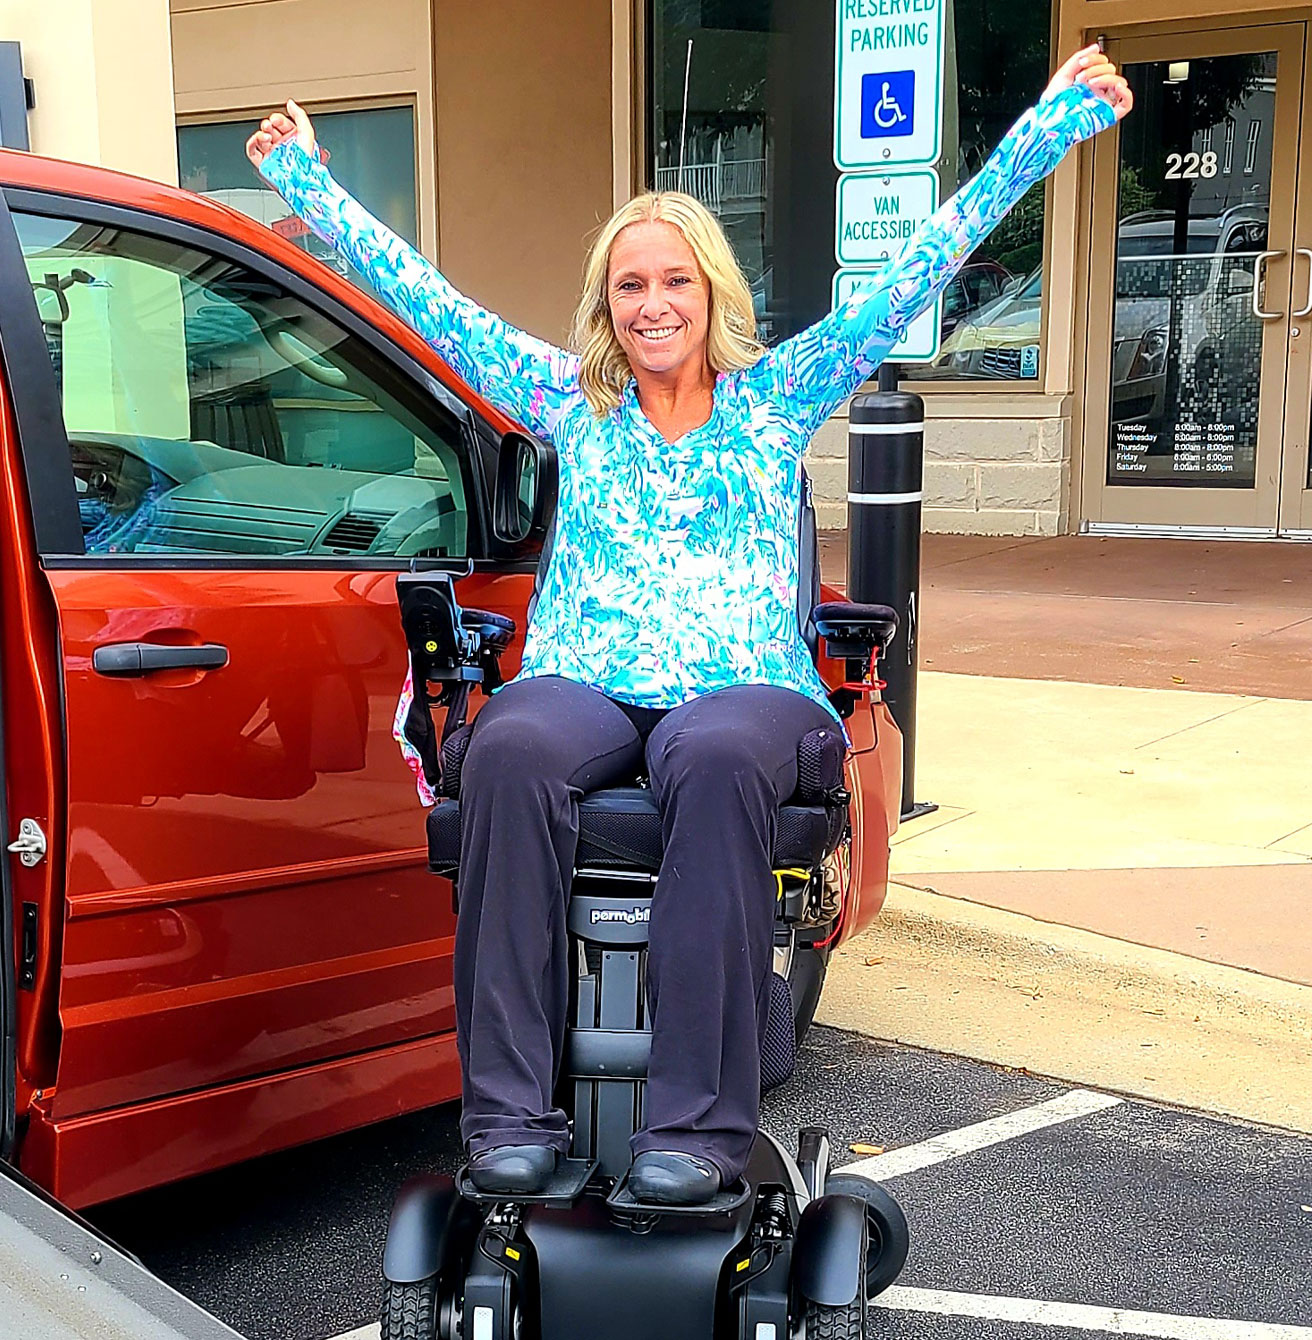 Ali in her wheelchair dressed in a blue and white shirt by a red van in a victory pose.